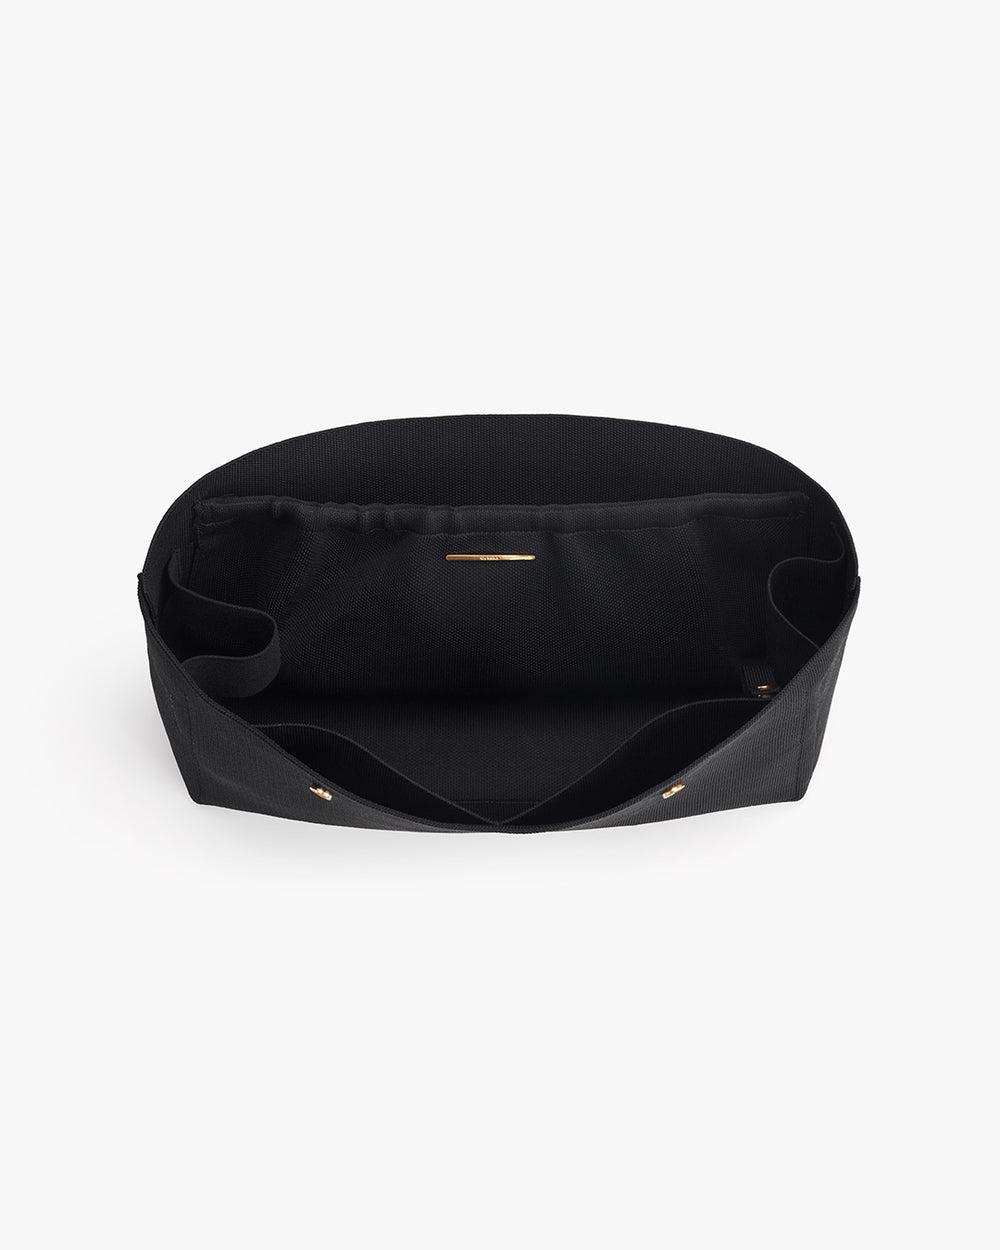 Open black handbag with pockets viewed from above.